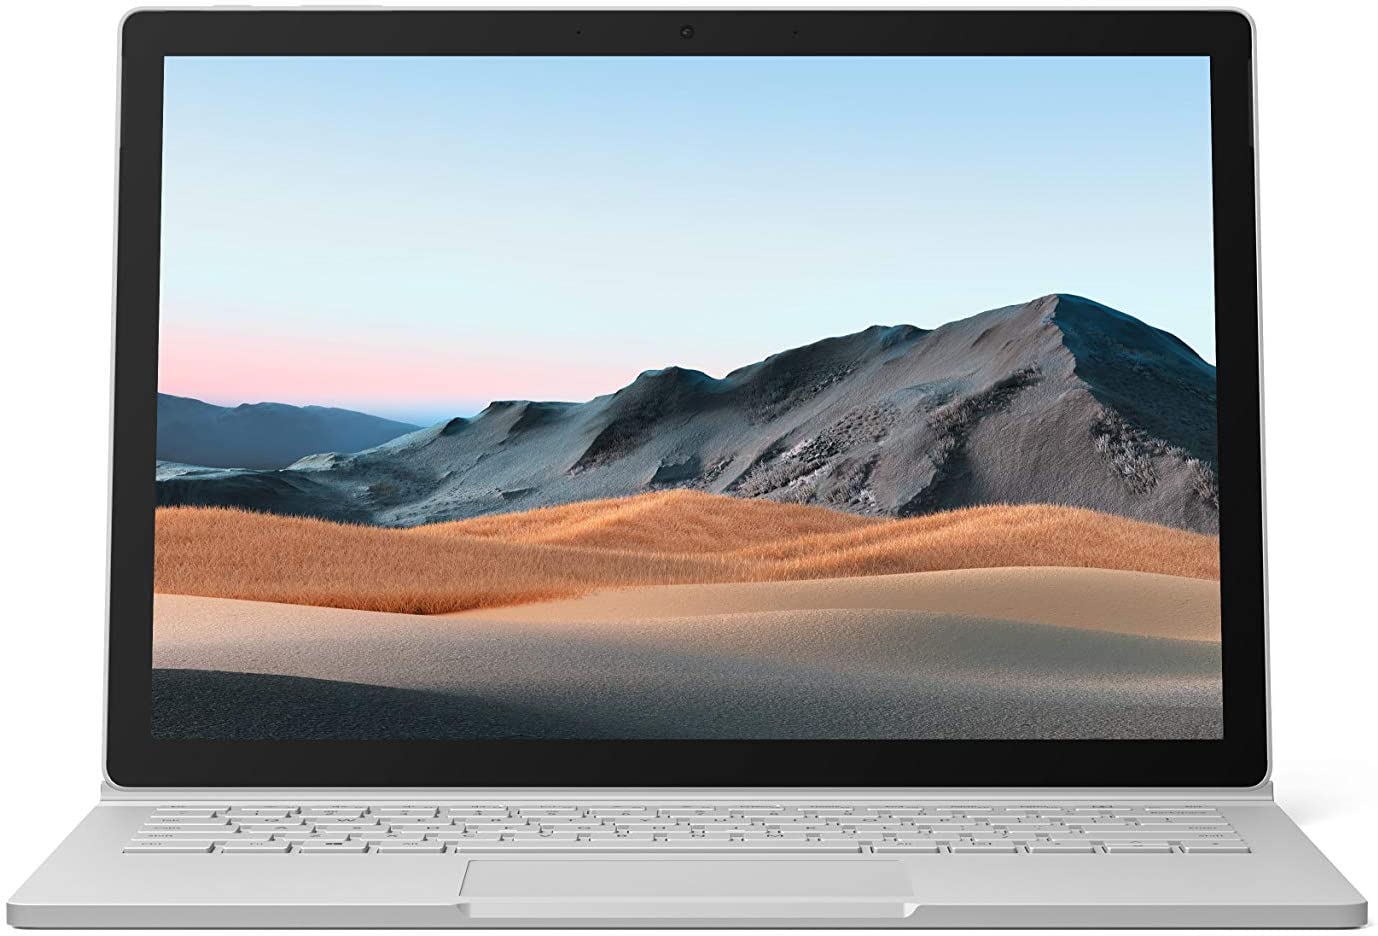 Microsoft surface book 3 Laptop for photo editing